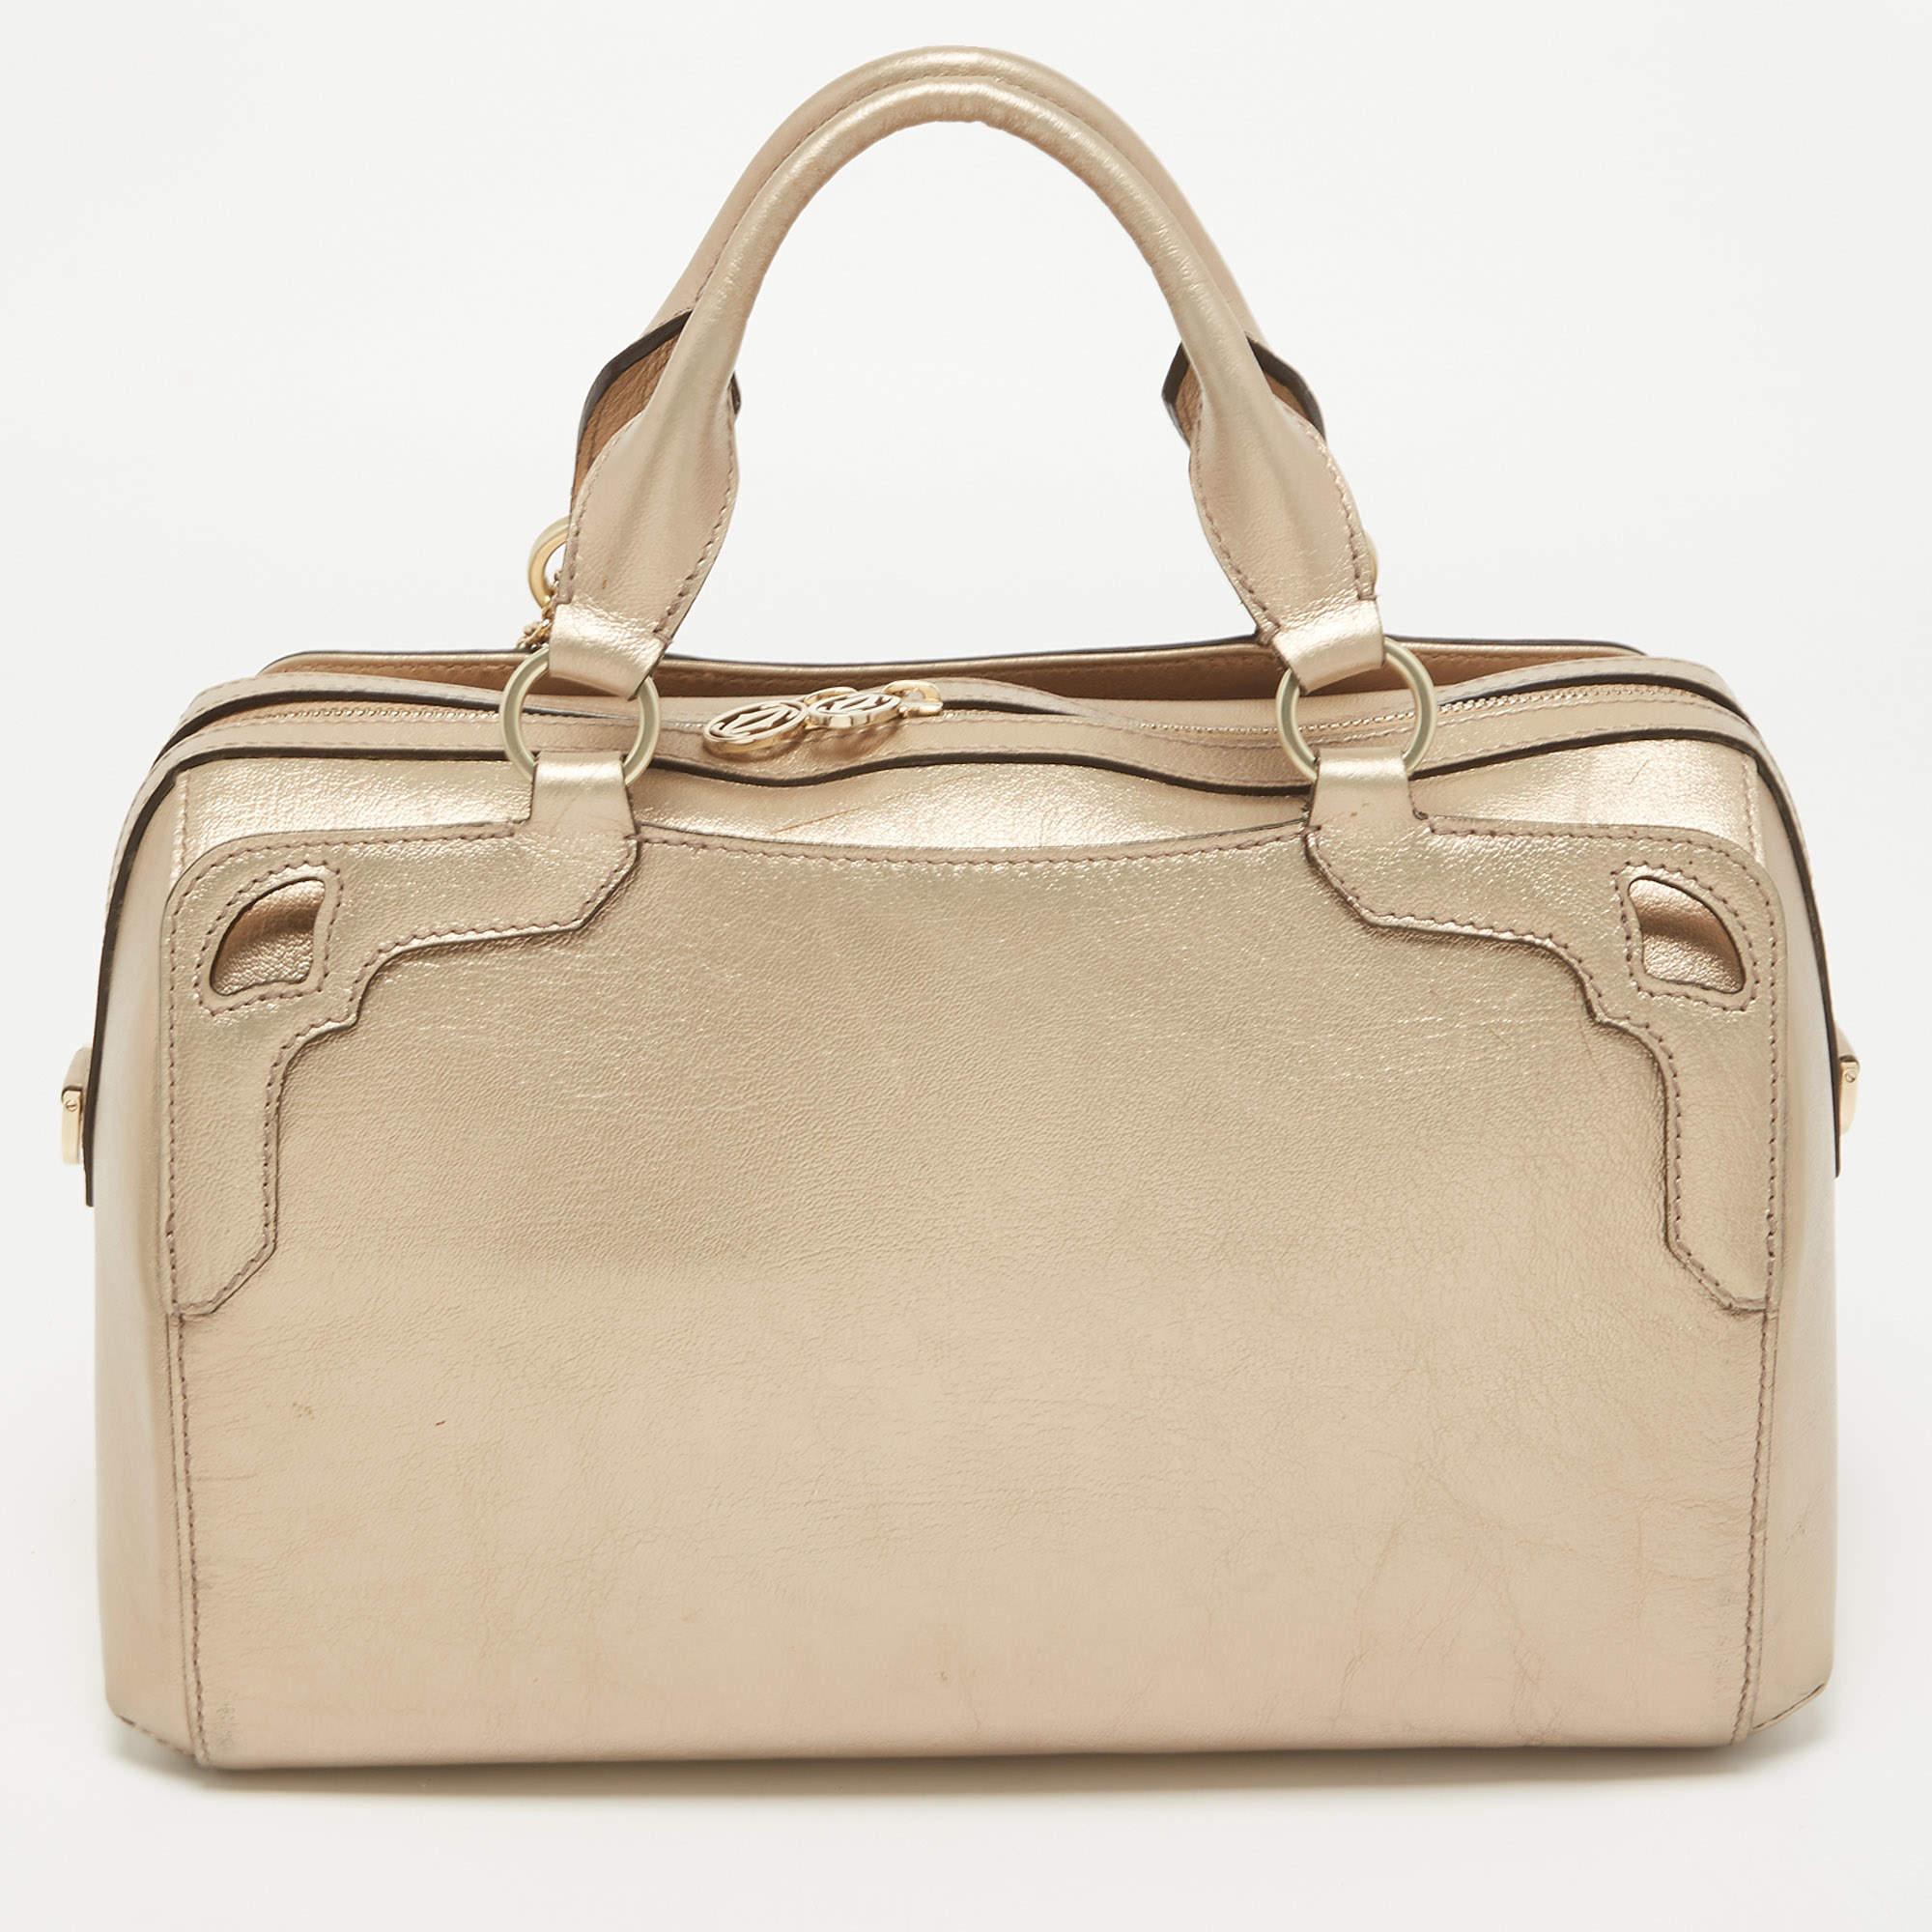 Showcasing classic allure and exceptional design, this Cartier Marcello de Cartier bag will win your vote as a favorite. It comes created from leather with a back slip pocket, and it embodies an attractive gold shade. Lined with canvas, the spacious